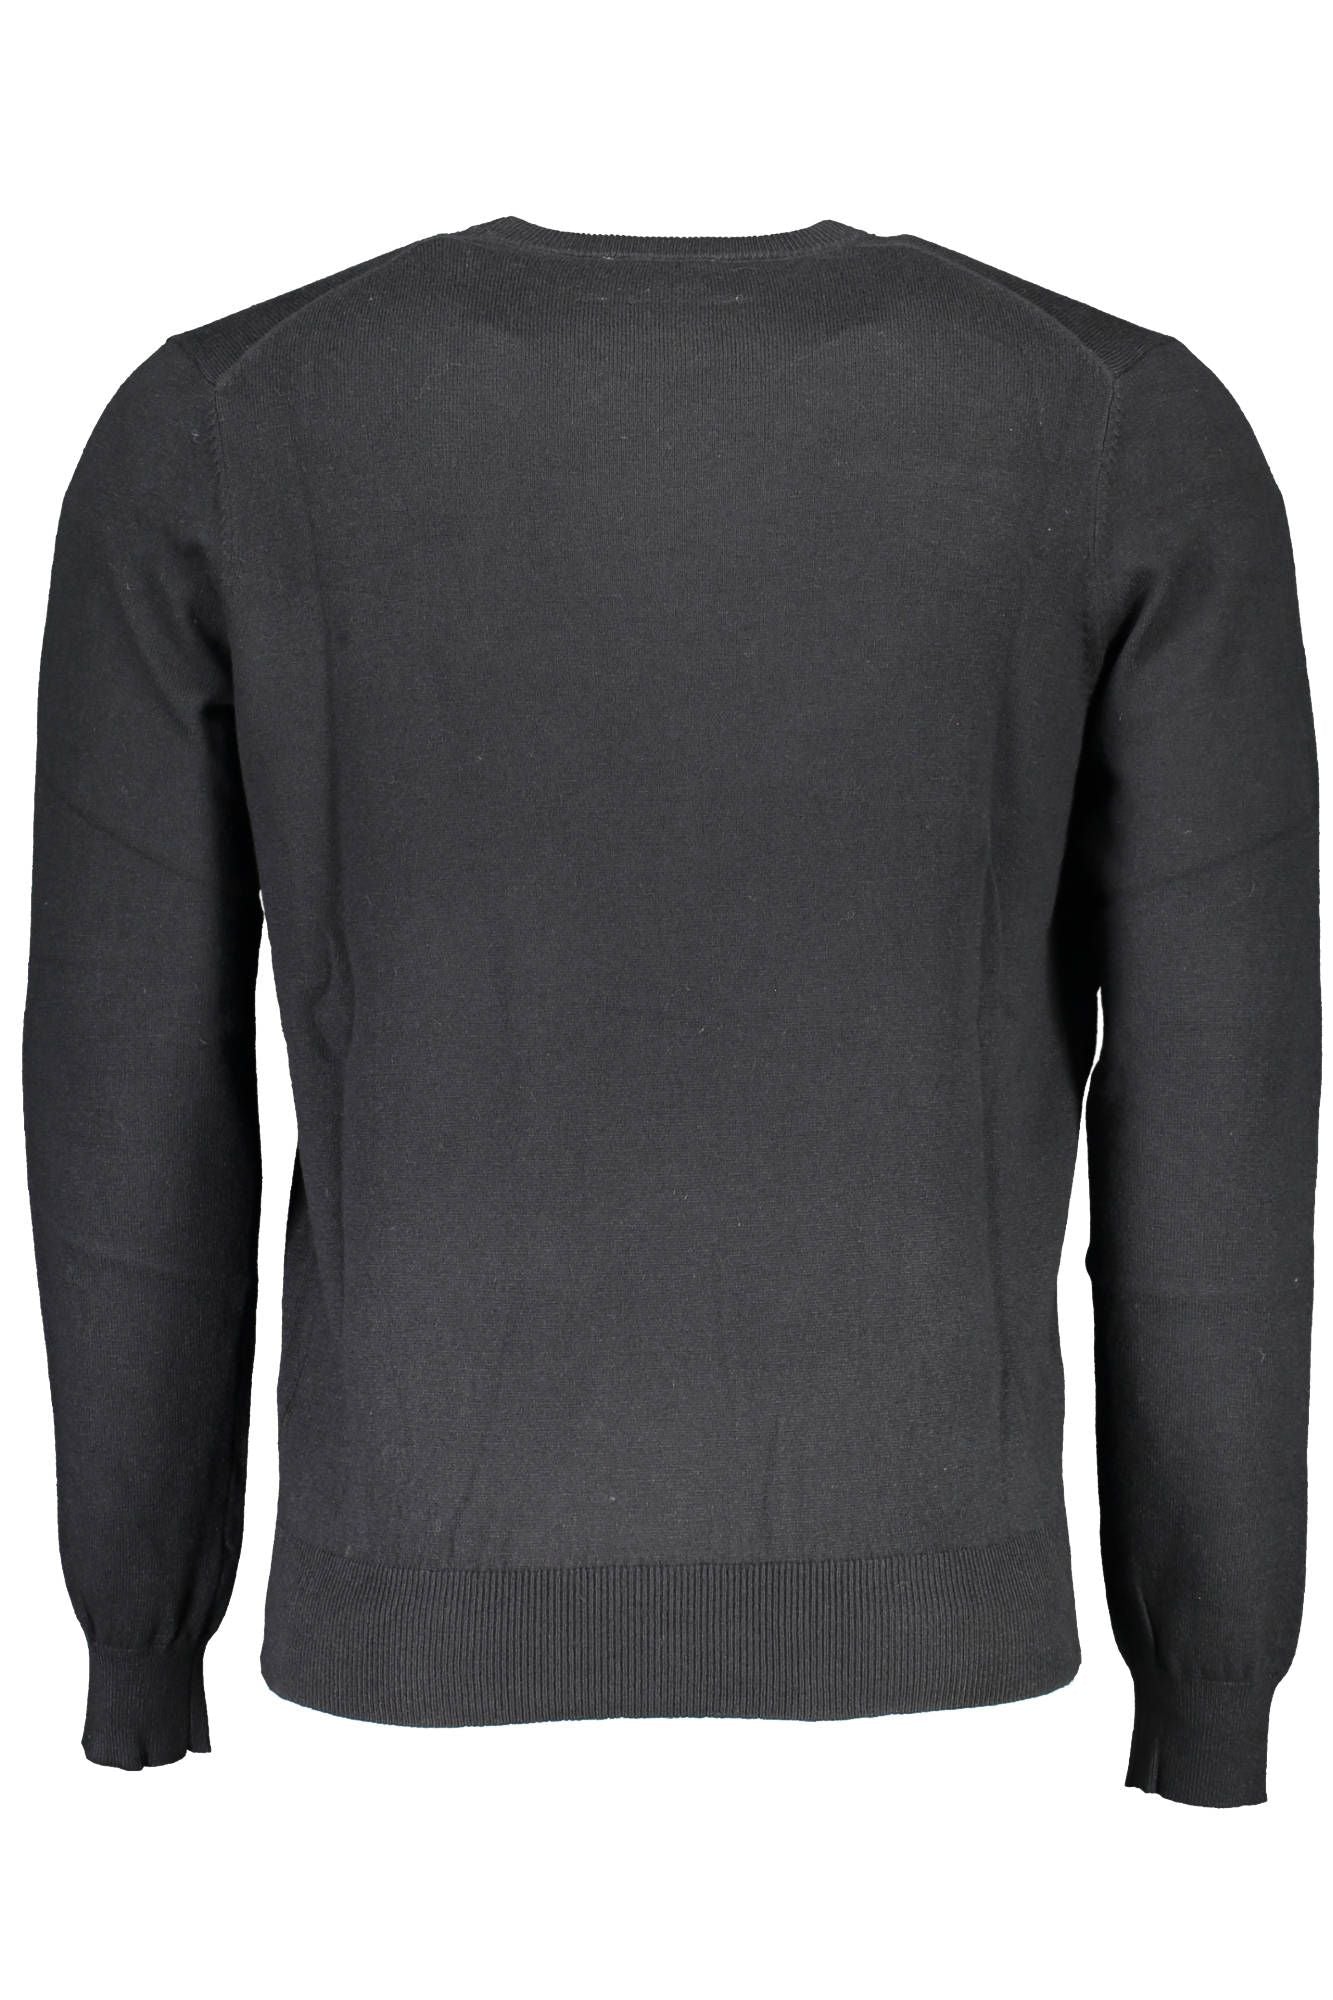 North Sails Eco-Friendly Embroidered Black Sweater